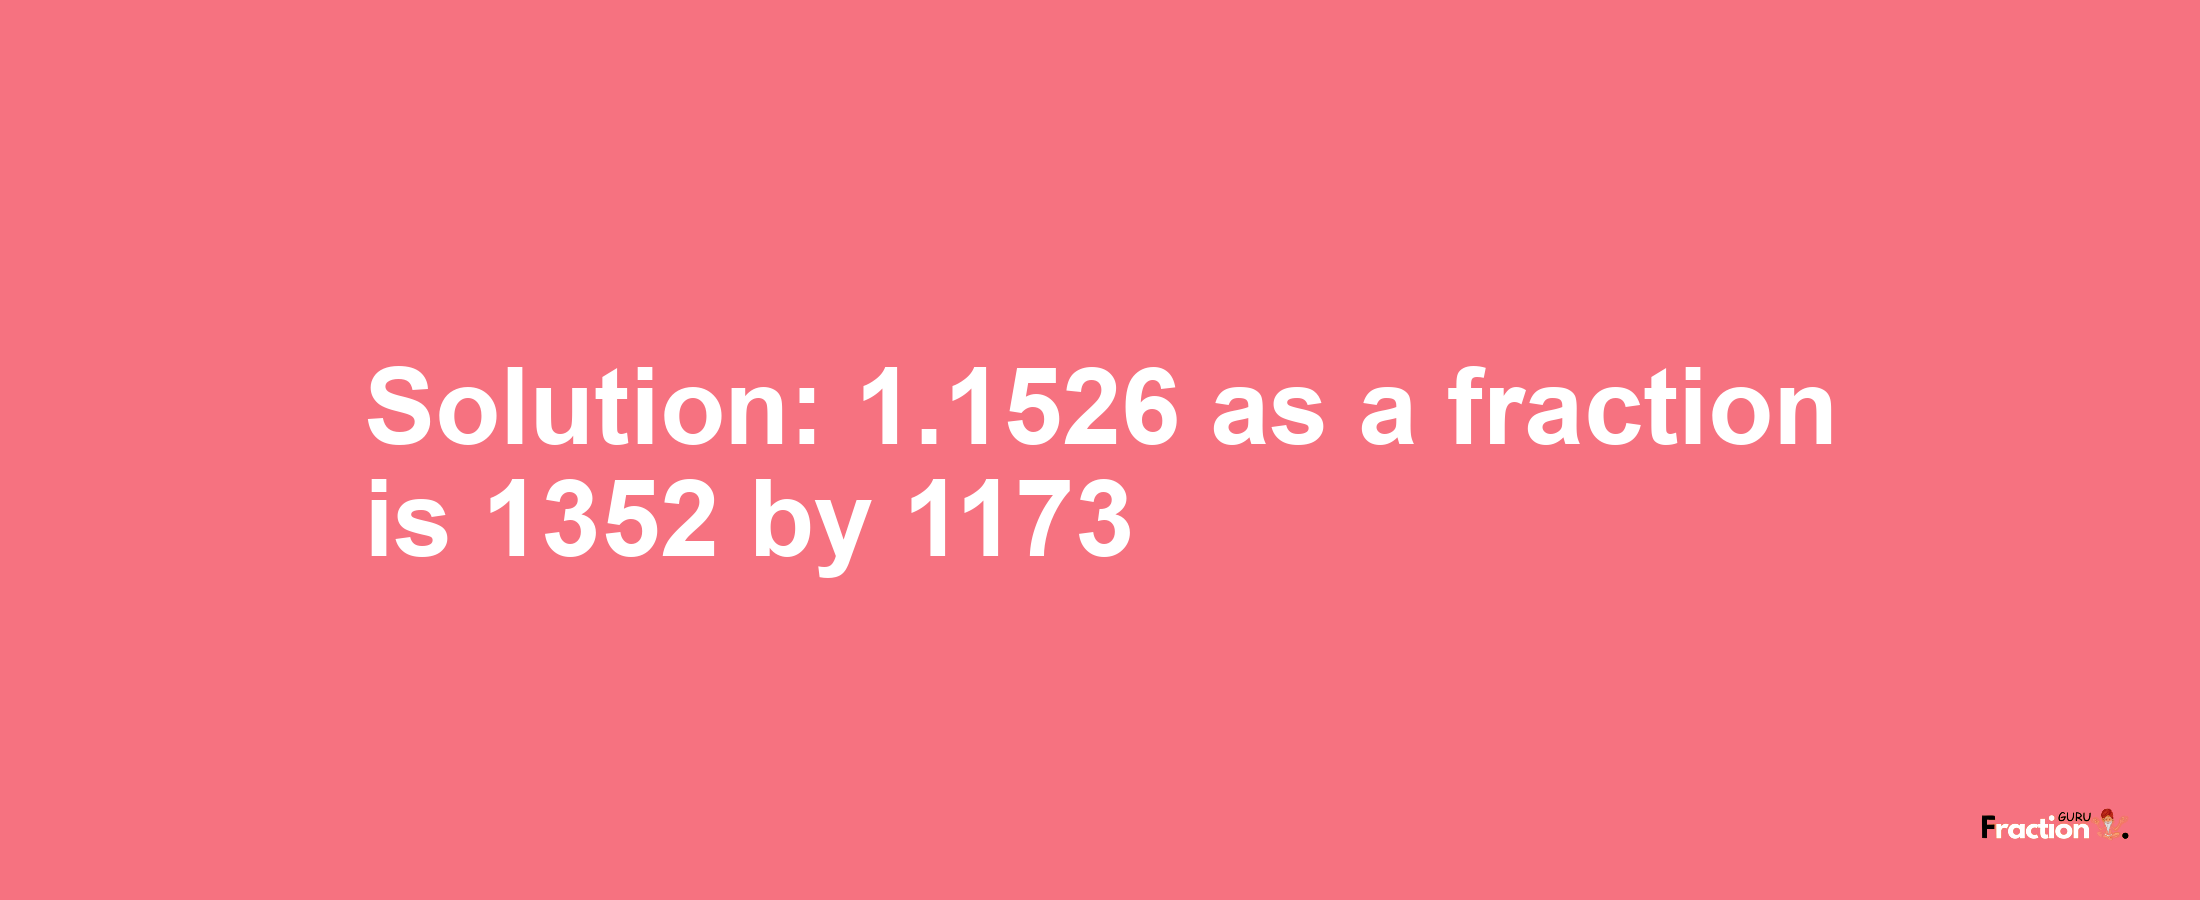 Solution:1.1526 as a fraction is 1352/1173